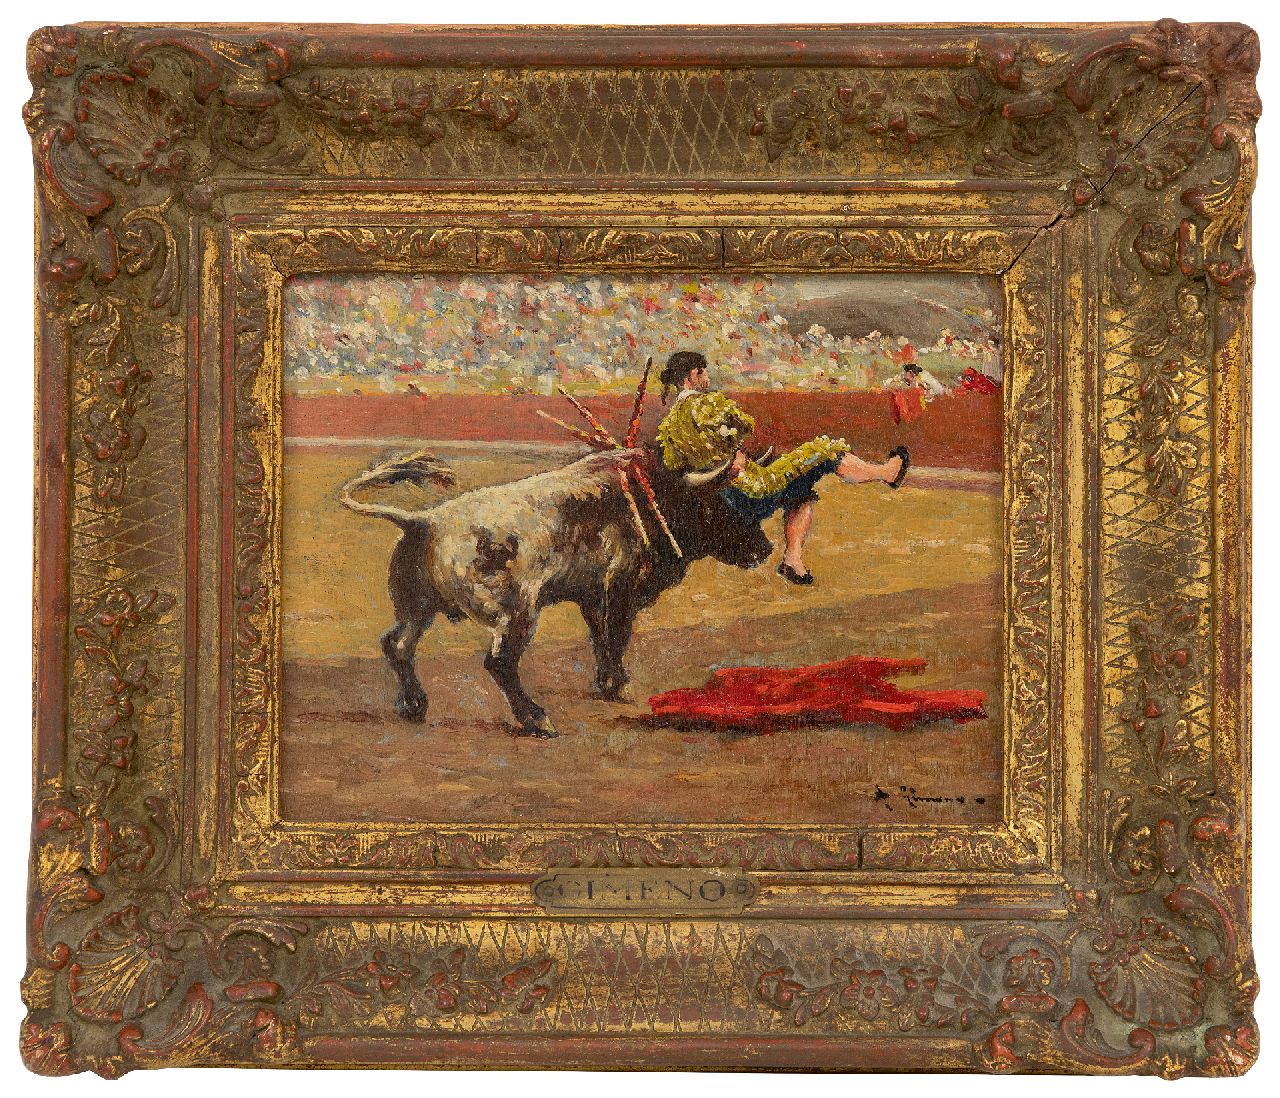 Gimeno A.  | Andrés Gimeno | Paintings offered for sale | The bullfight, oil on panel 14.2 x 18.1 cm, signed l.r.